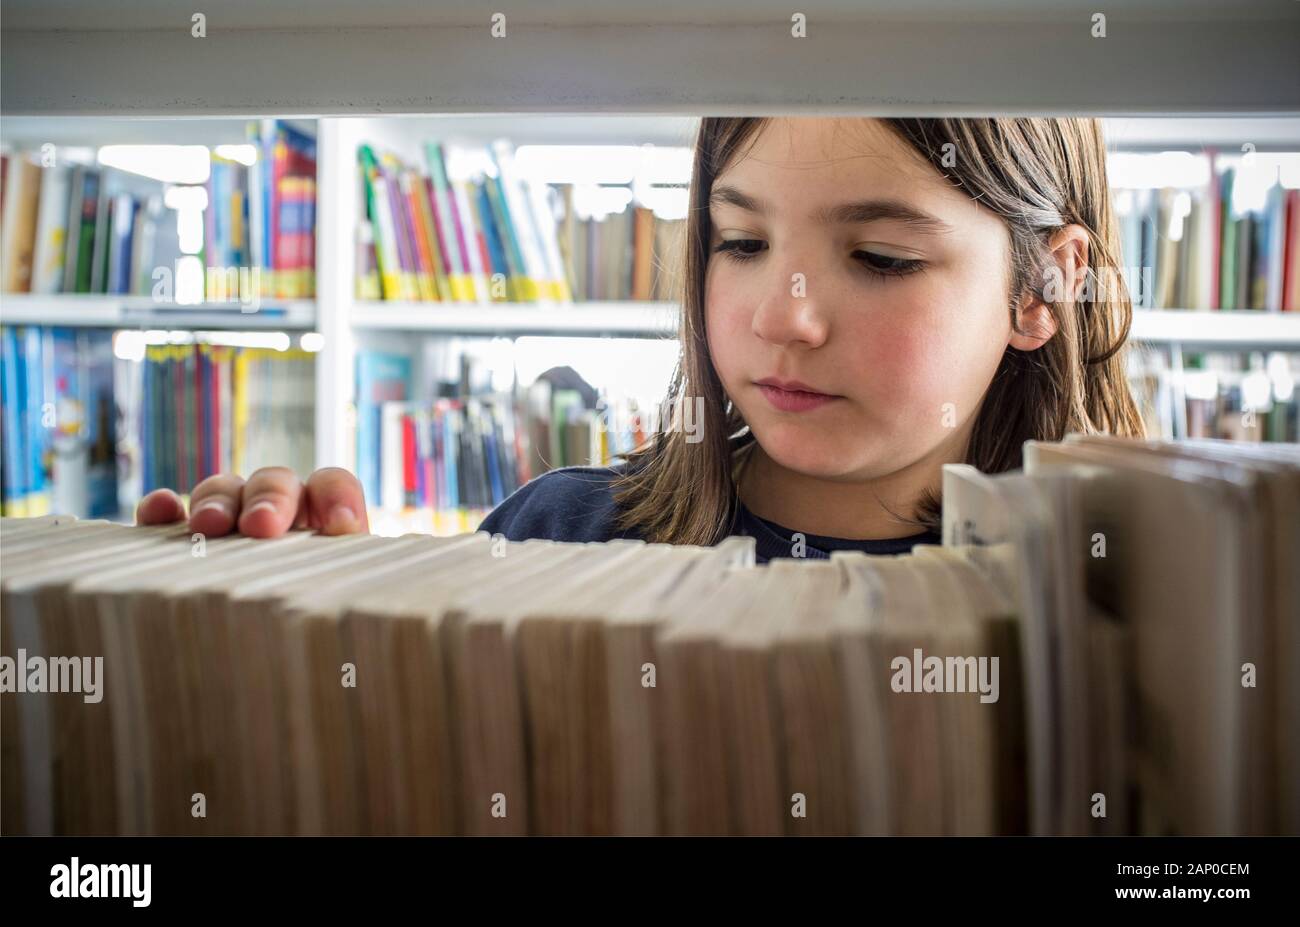 Young Girl Selecting Books From Library Bookshelf Children